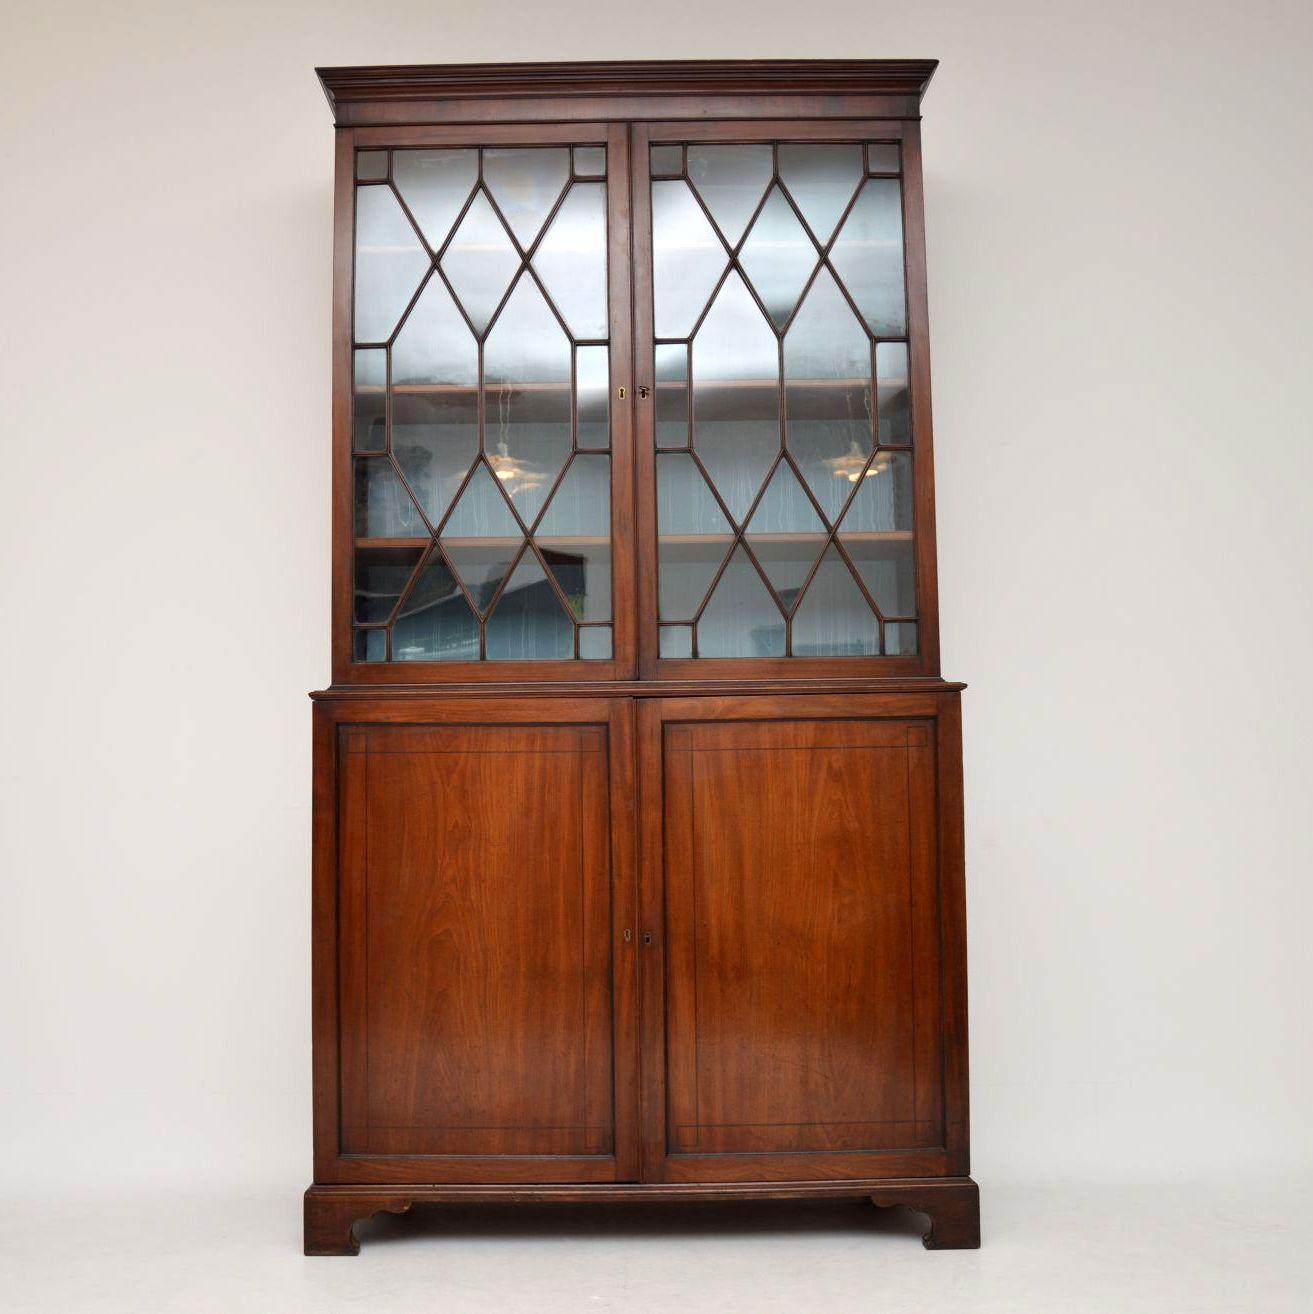 Antique George III mahogany library bookcase in two sections and in very good original condition. The astral-glazed top section has three bookshelves inside that are fully adjustable & slide in & out on fixed grooves. The back is all original and is